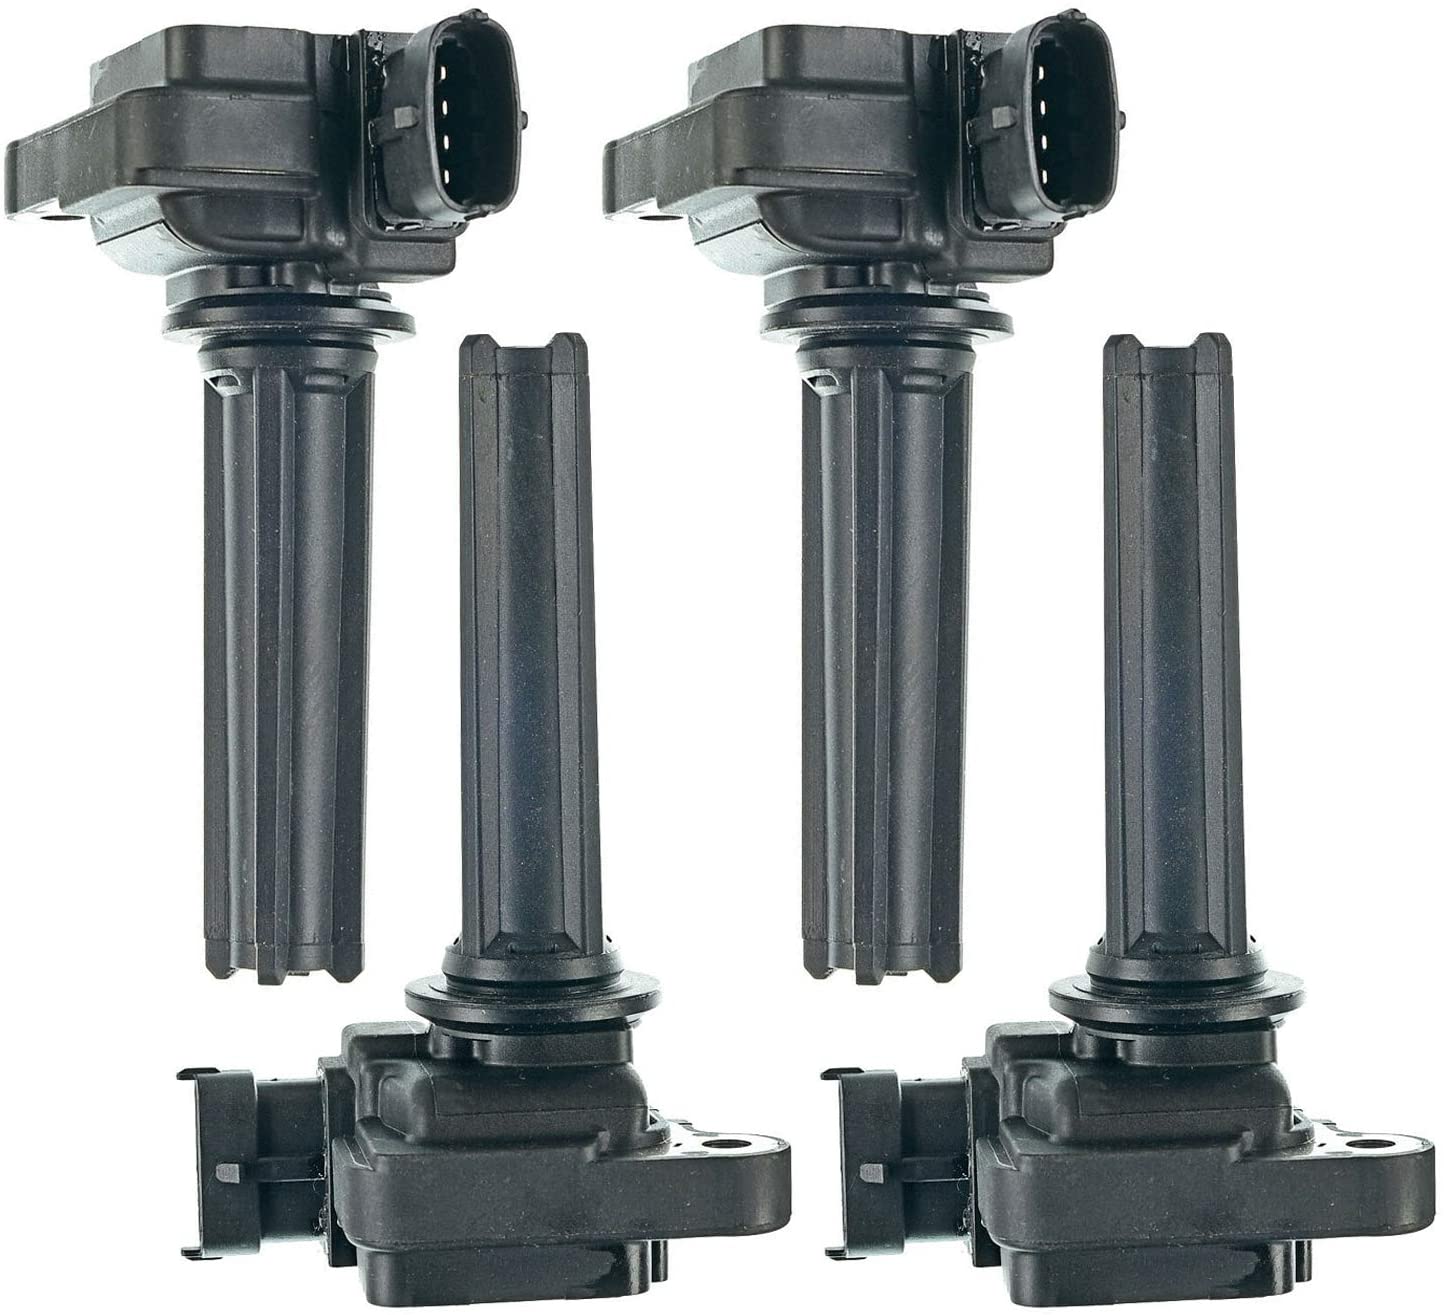 Set of 4 Ignition Coils Pack for 2003-2011 Saab 9-3 9-3X (Only Fits l4 2.0L Turbo Engine)